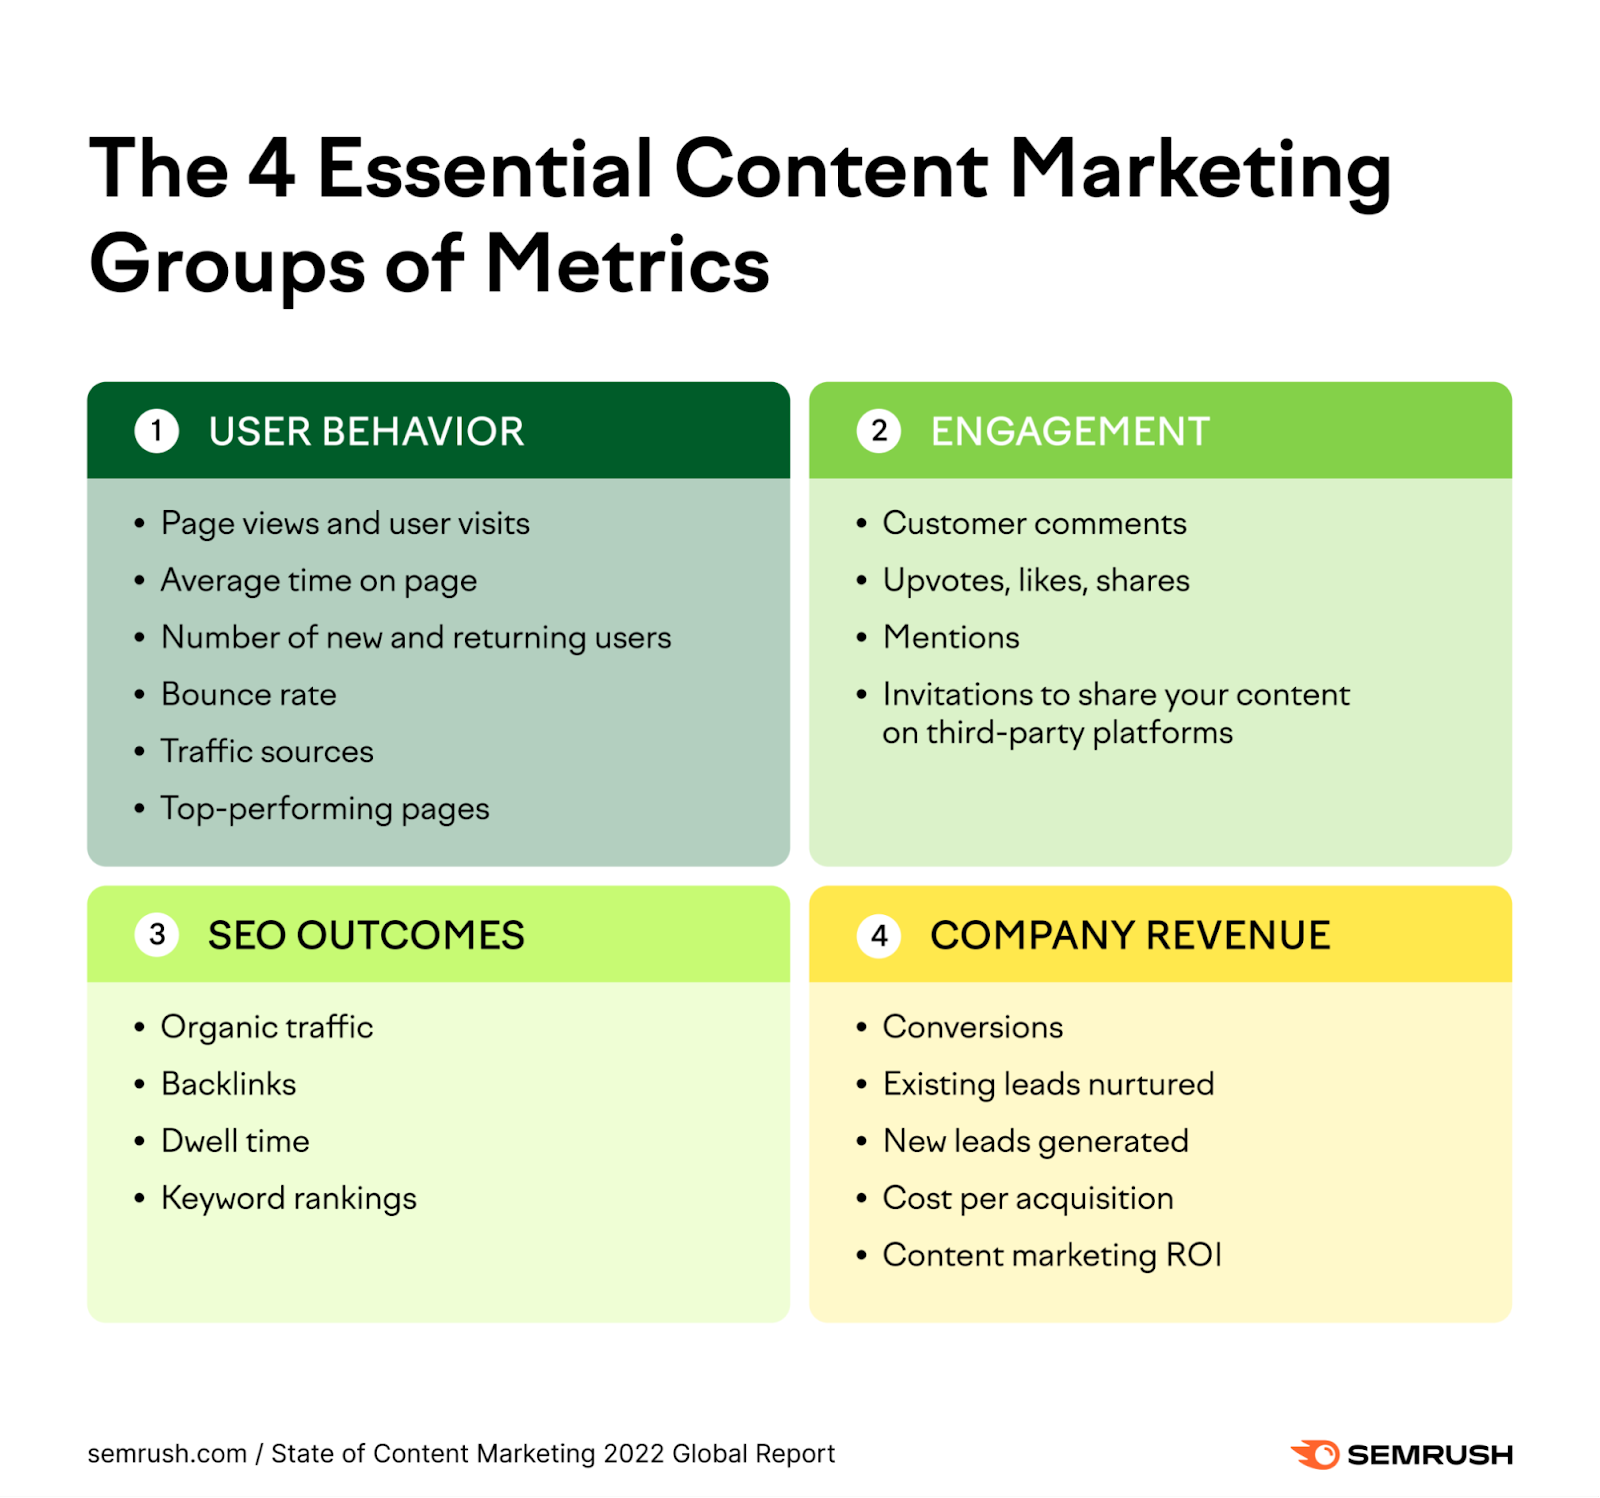 The 4 essential content marketing groups of metrics infographic